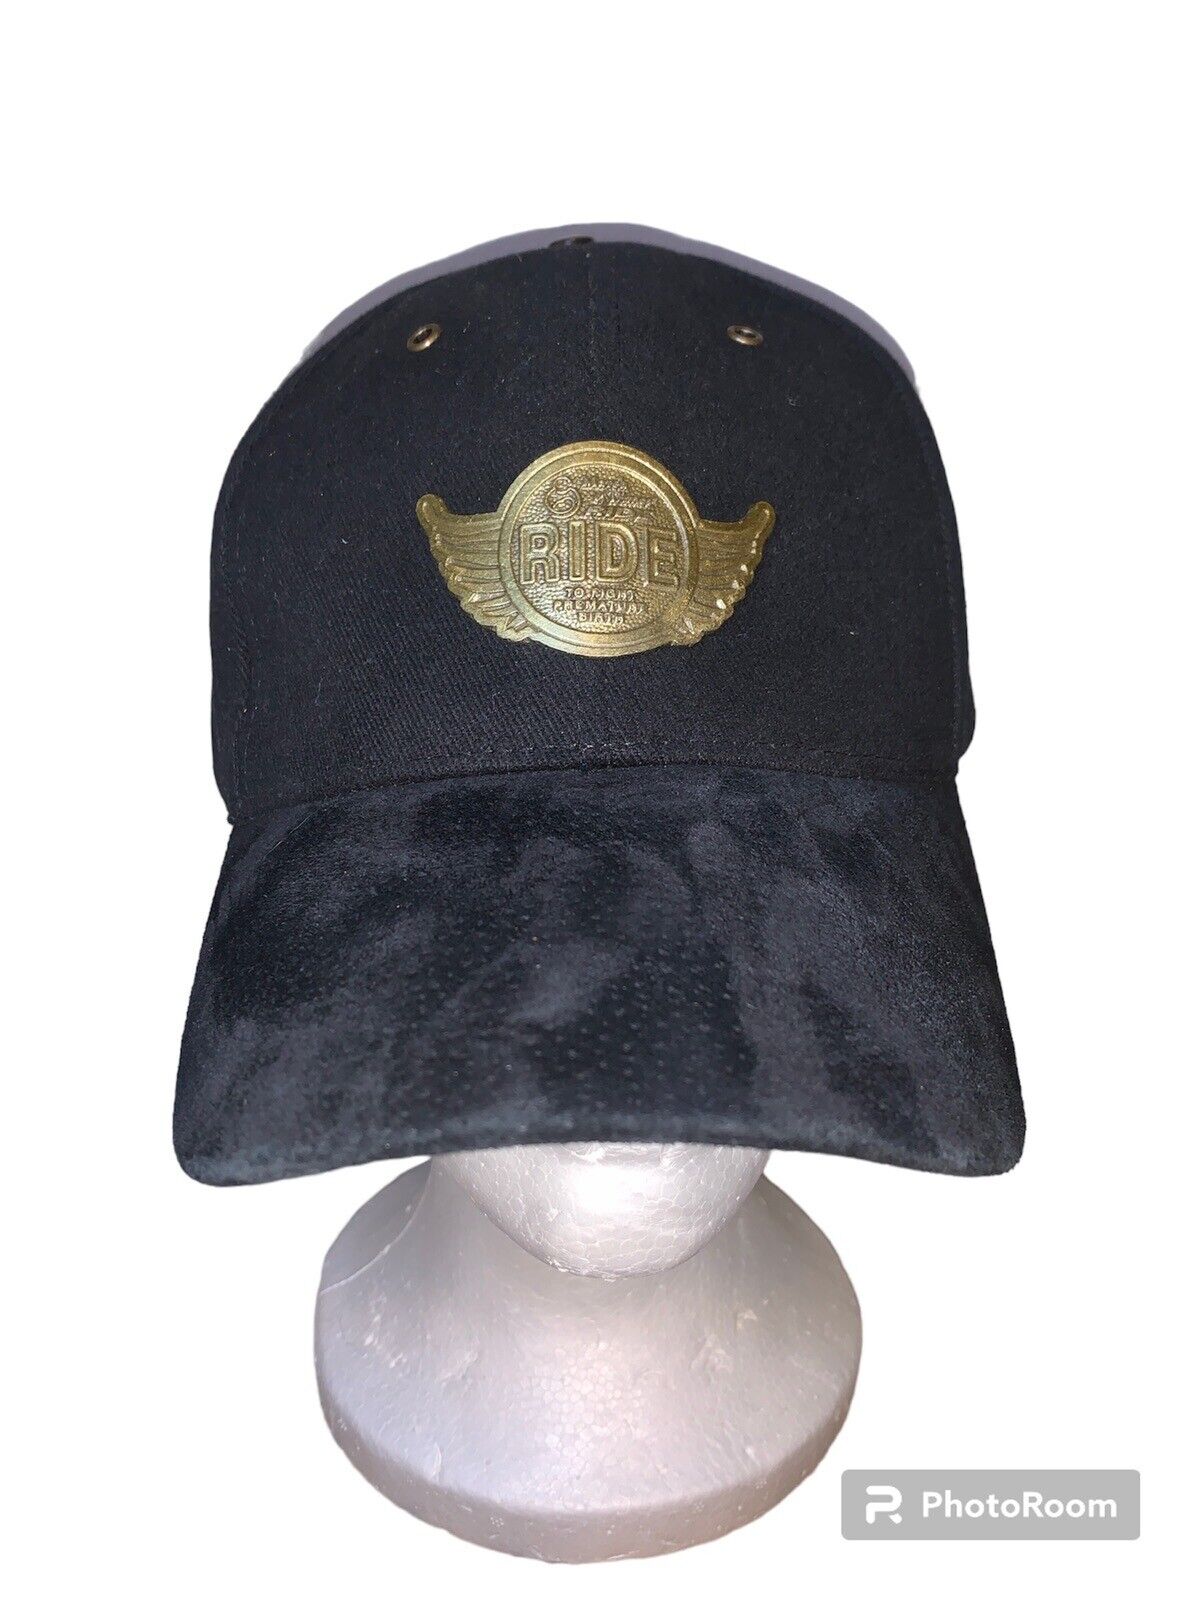 March of Dimes Ride to Fight Premature Birth Motorcycle Event Suede Baseball Cap